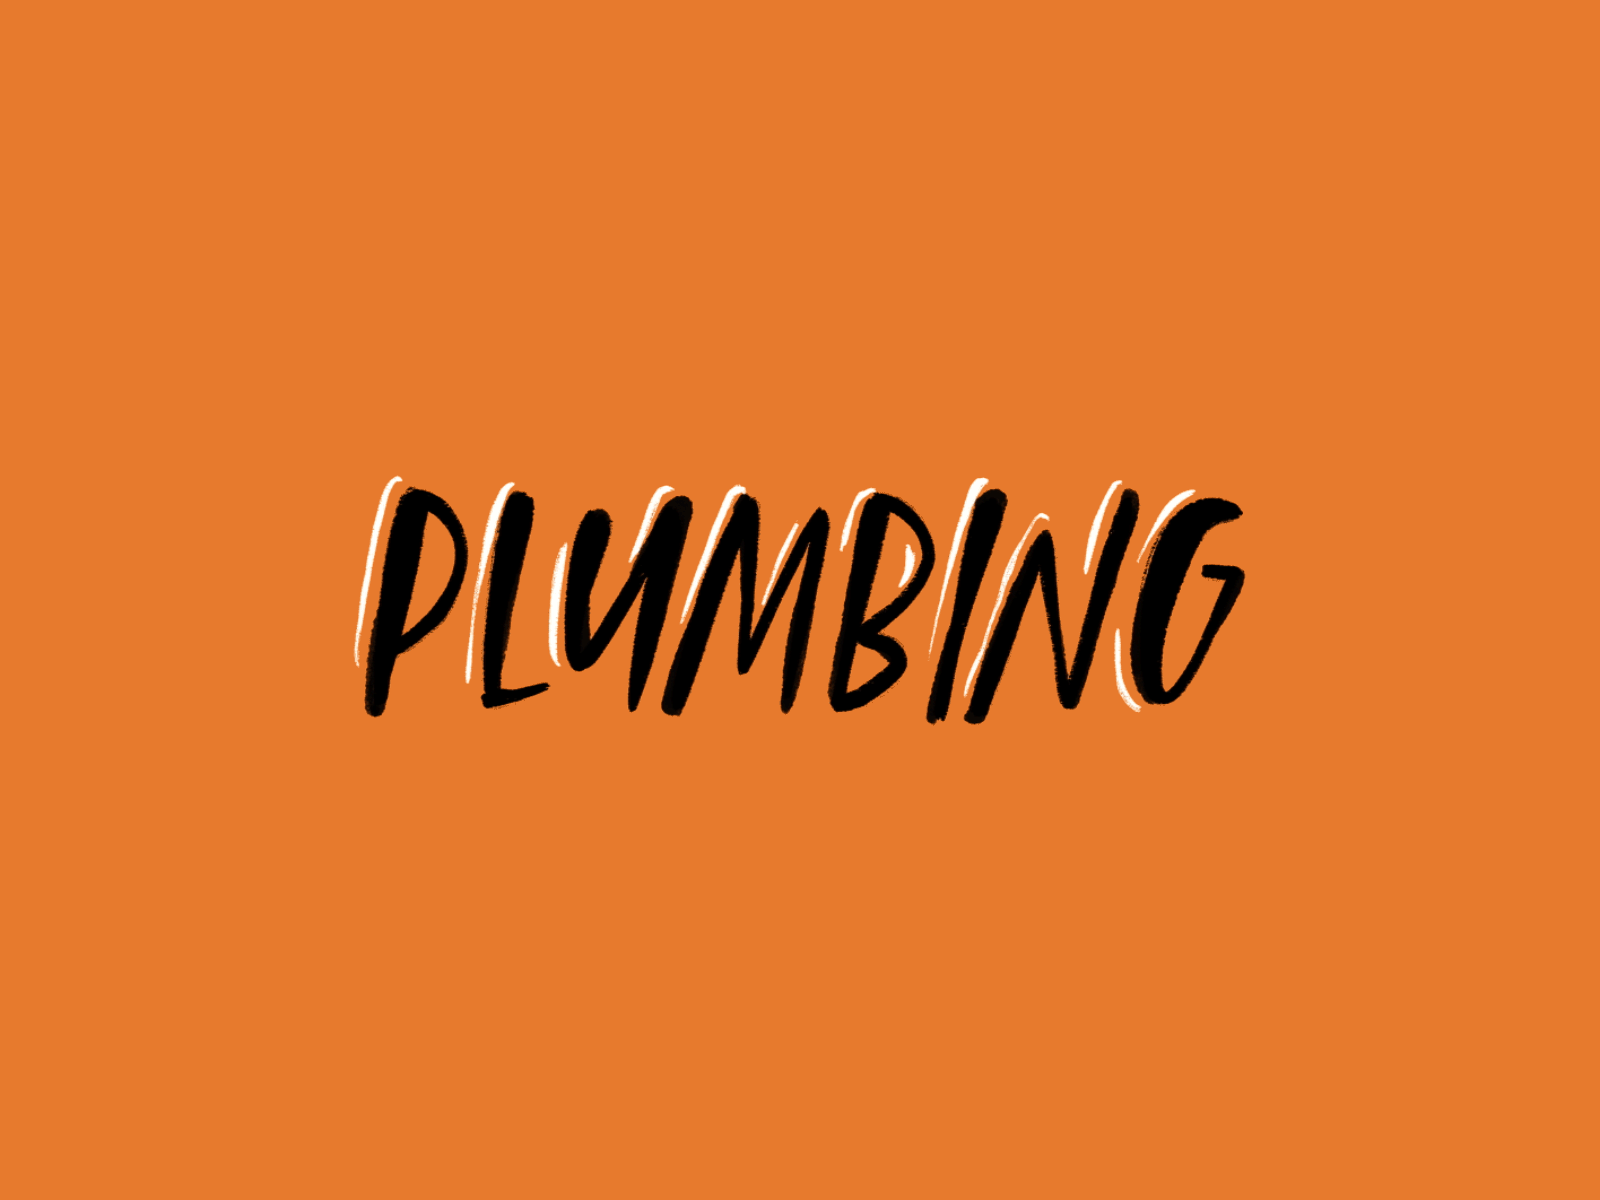 Plumbing, for Applewood 2d 2d animation animation cel cel animation text type